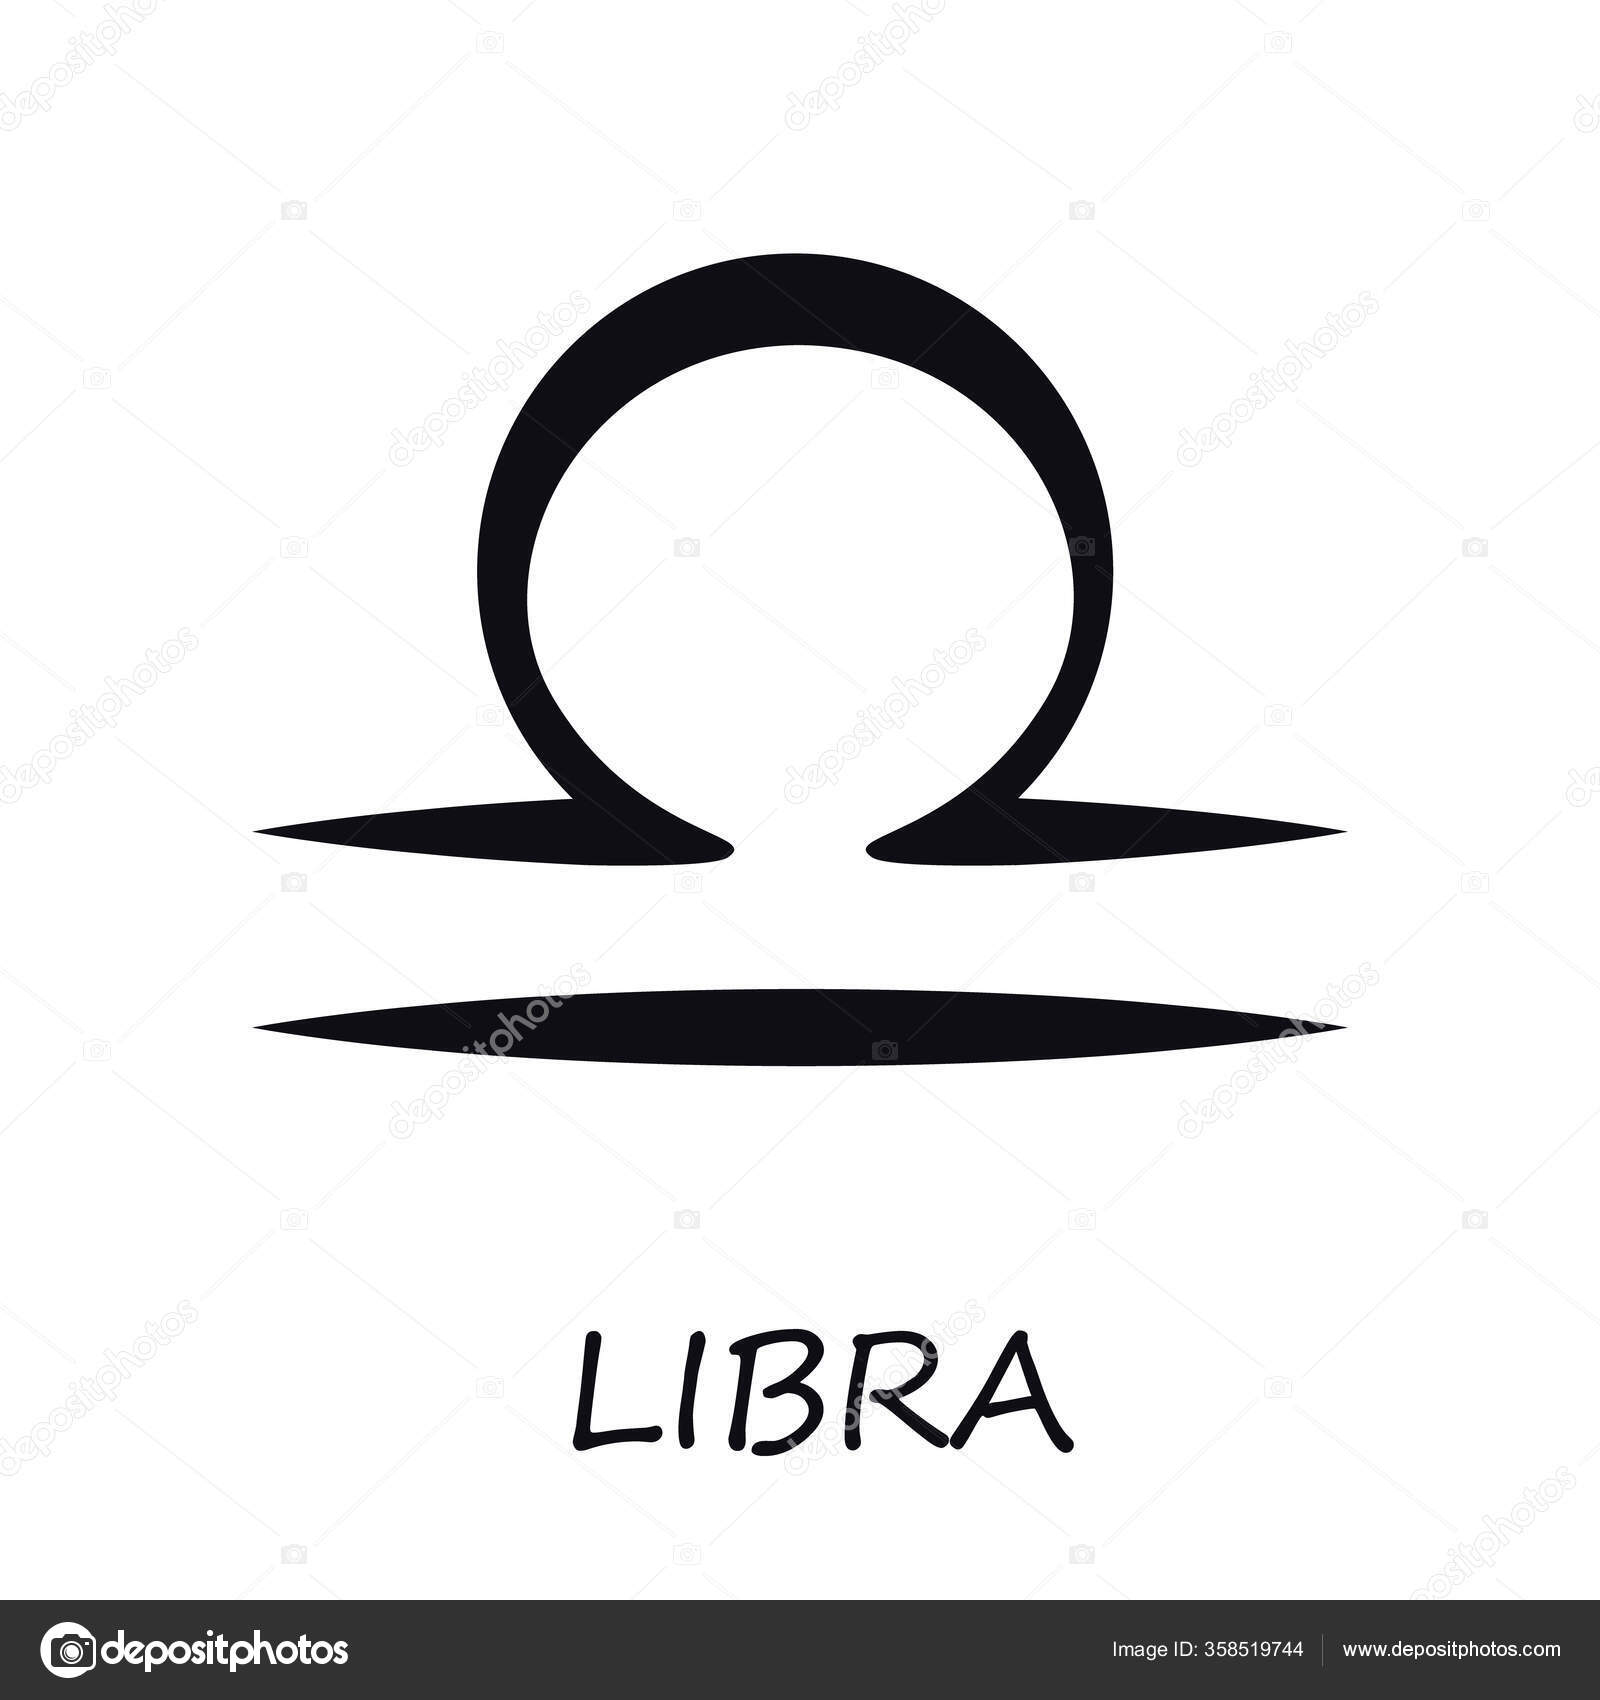 Gold scales libra astrological sign on a black background vector